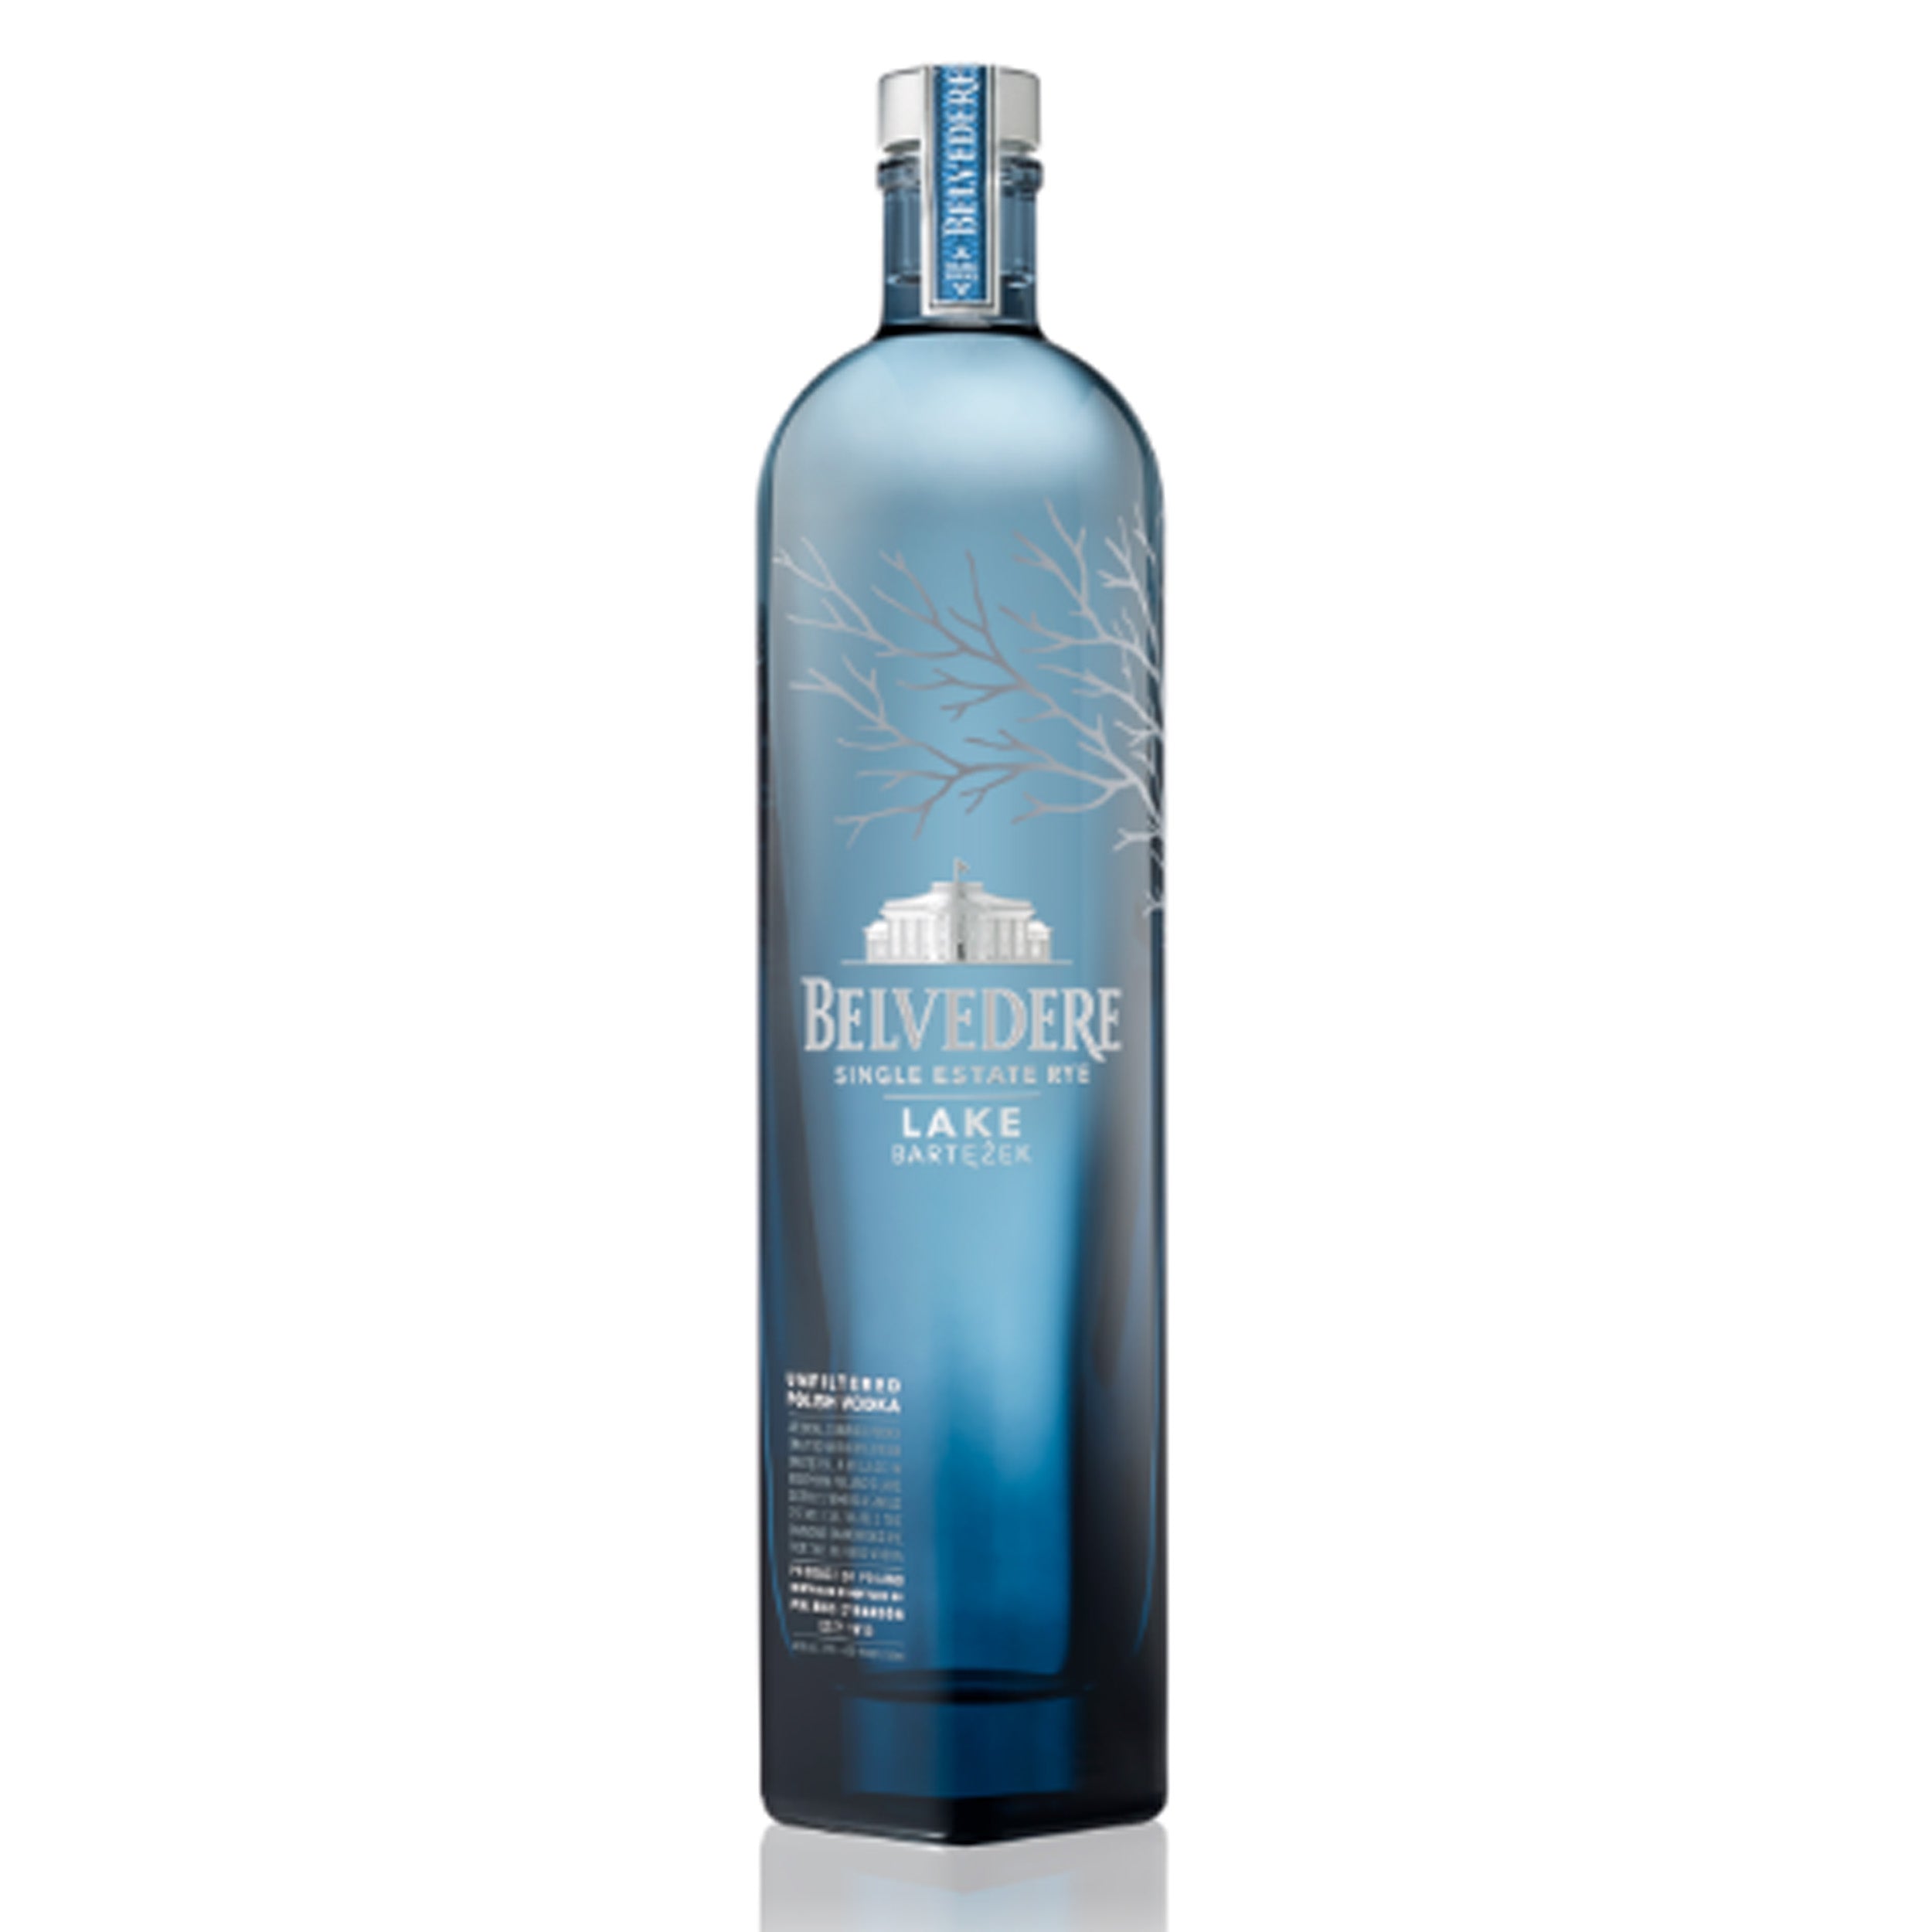 Belvedere Intense Vodka, Poland  prices, stores, product reviews